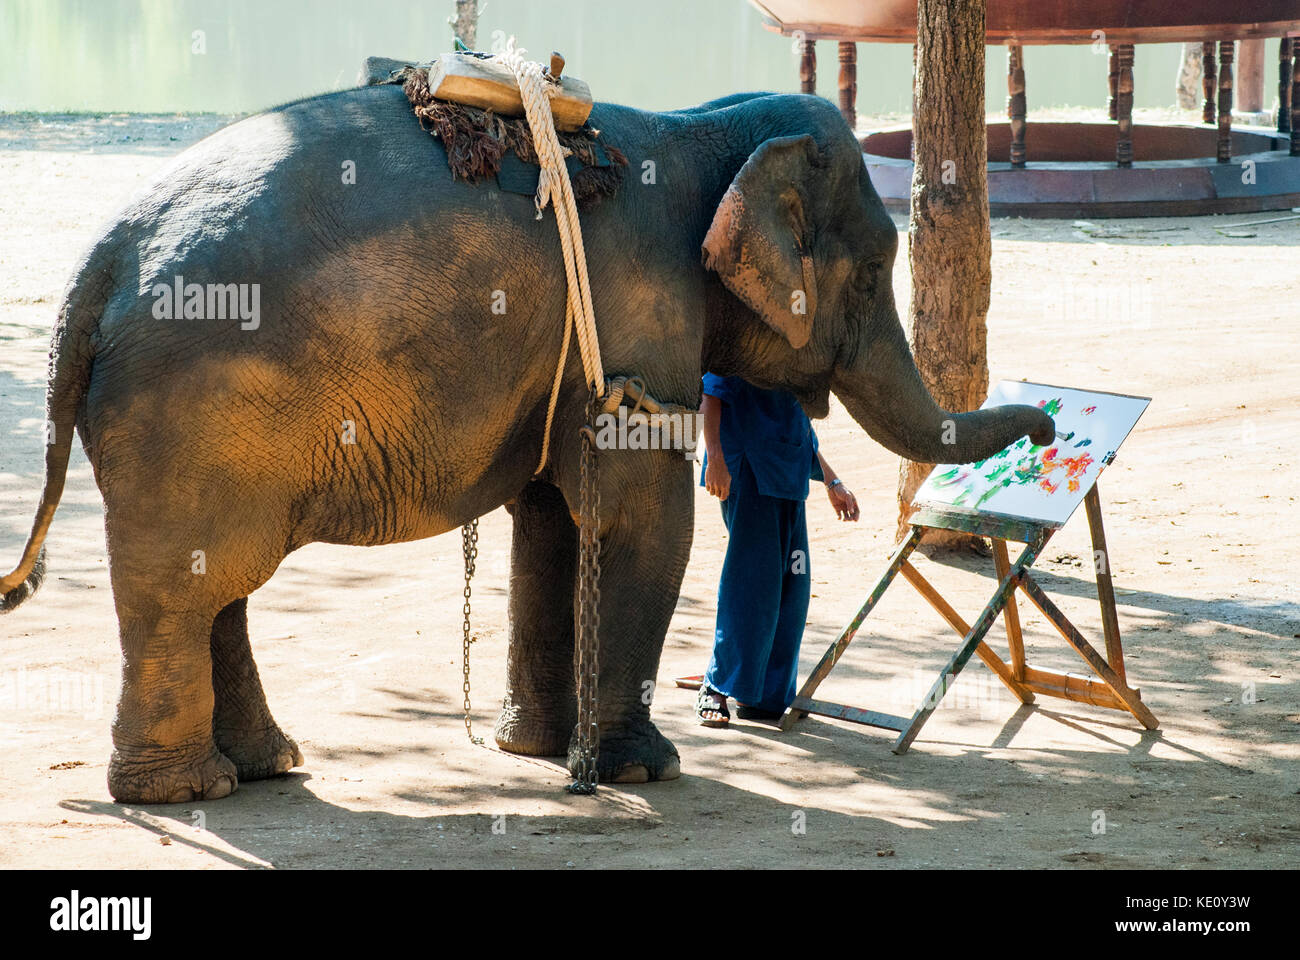 Mahout and elephant working at the Elephant Conservation Centre at Lampung, near Chiang Mai, northern Thailand Stock Photo